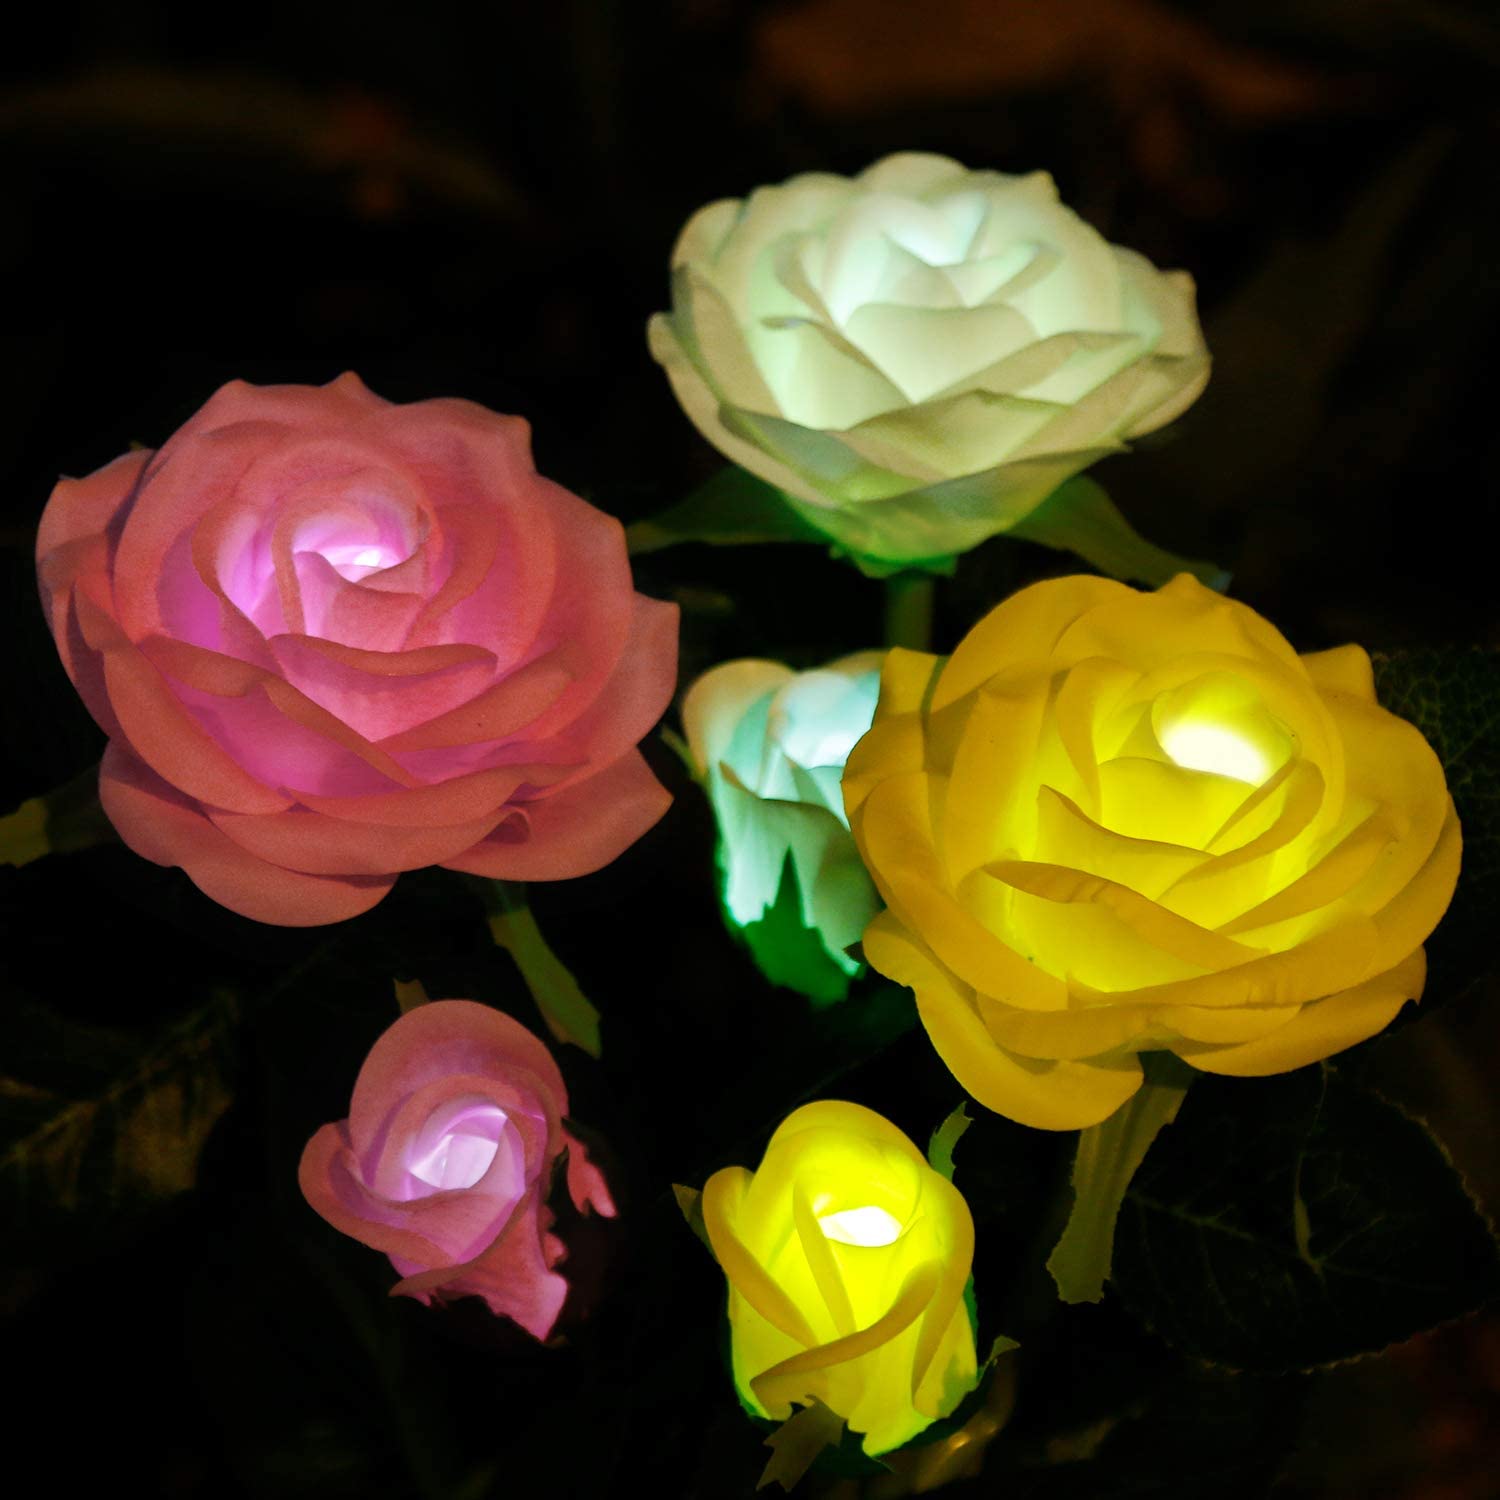 Anpro Solar Garden Rose Lights,3 Pack Waterproof Solar Lights with 6 Roses Lights Outdoor Garden Decorative, Waterproof with Stakes Decor for Garden Yard Party,Valentine's Day(White, Pink,Yellow)
